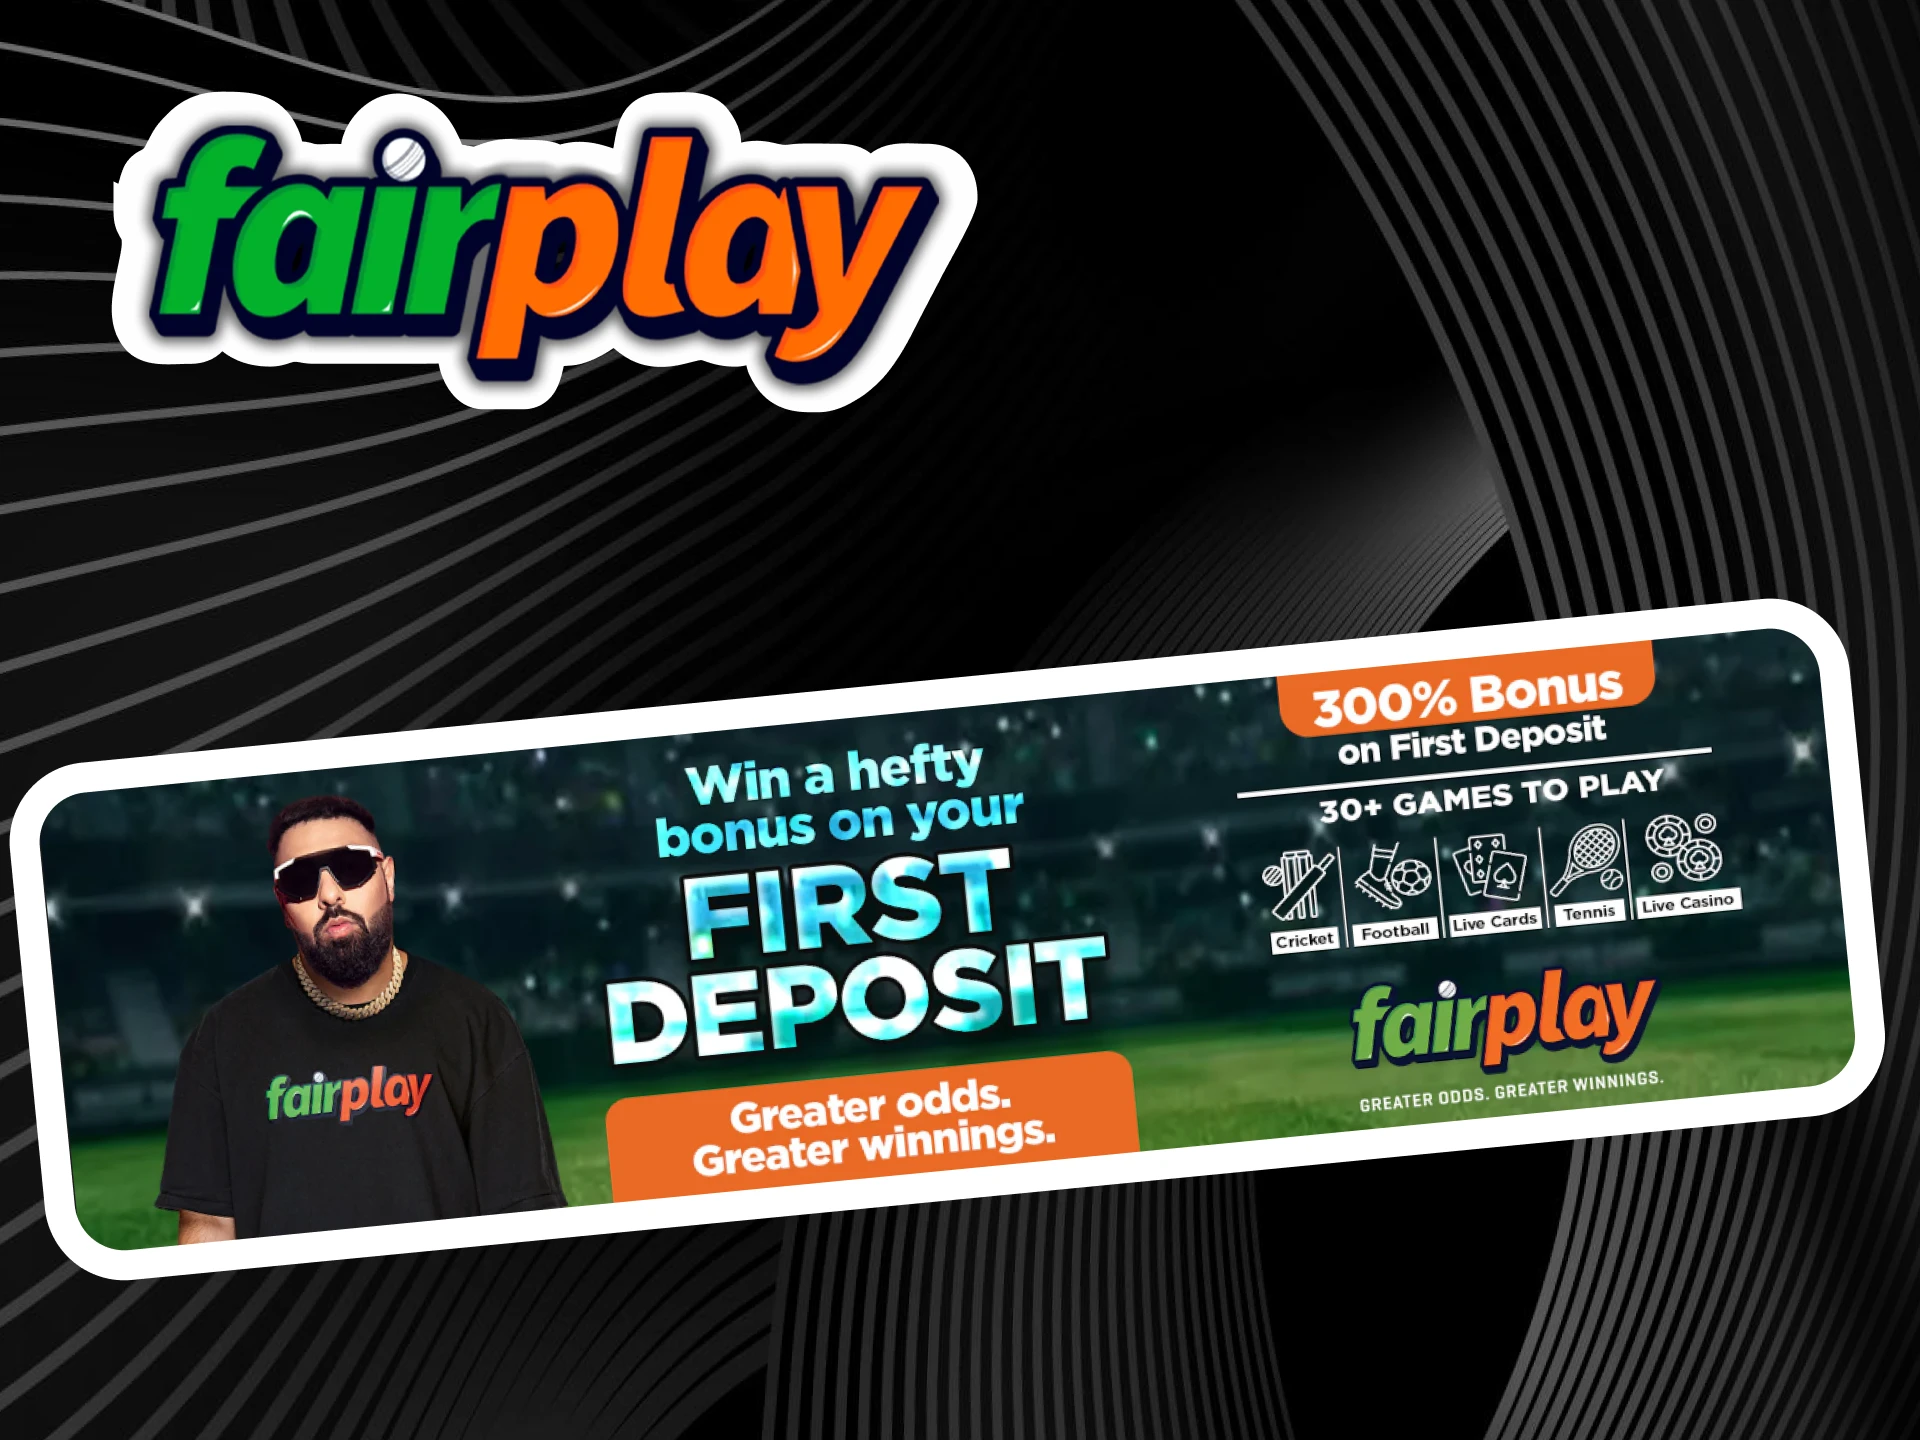 After the first deposit you get the Fairplay welcome bonus of 300% up to 50,000 INR.